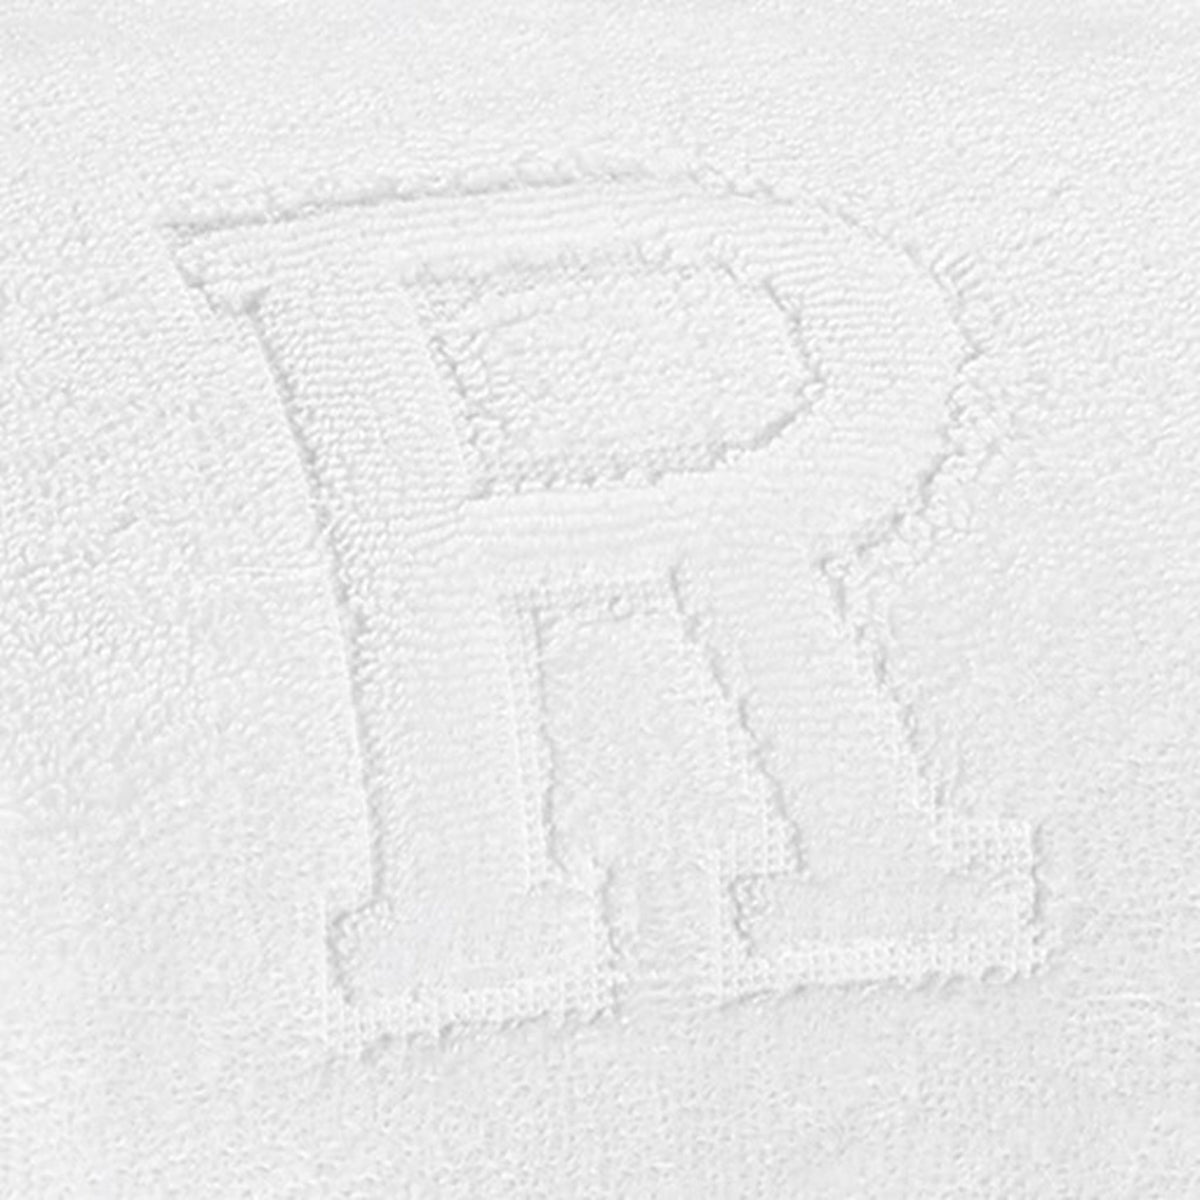 Swatch Sample of Letter R Matouk Auberge Bath Towels